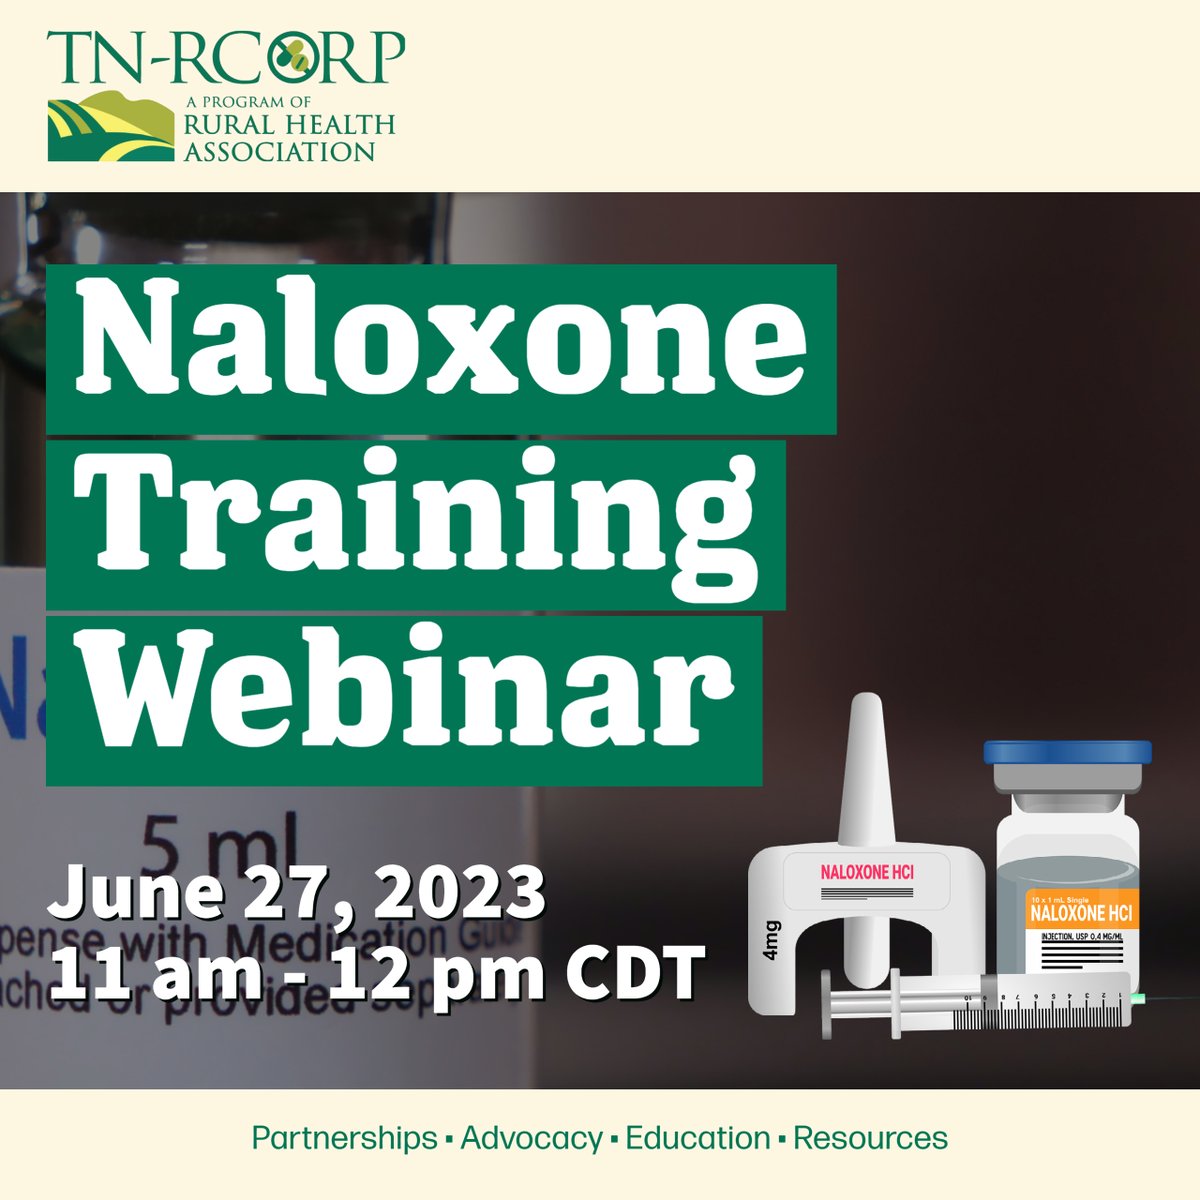 Check out @TNRuralHealth 's virtual training webinar June 27th from 11 am - 12 pm CDT!
Topics covered: impacts of the overdose epidemic, the impact of substance misuse on the brain, responding to an overdose, and how to administer Naloxone. Register: bit.ly/NalWeb